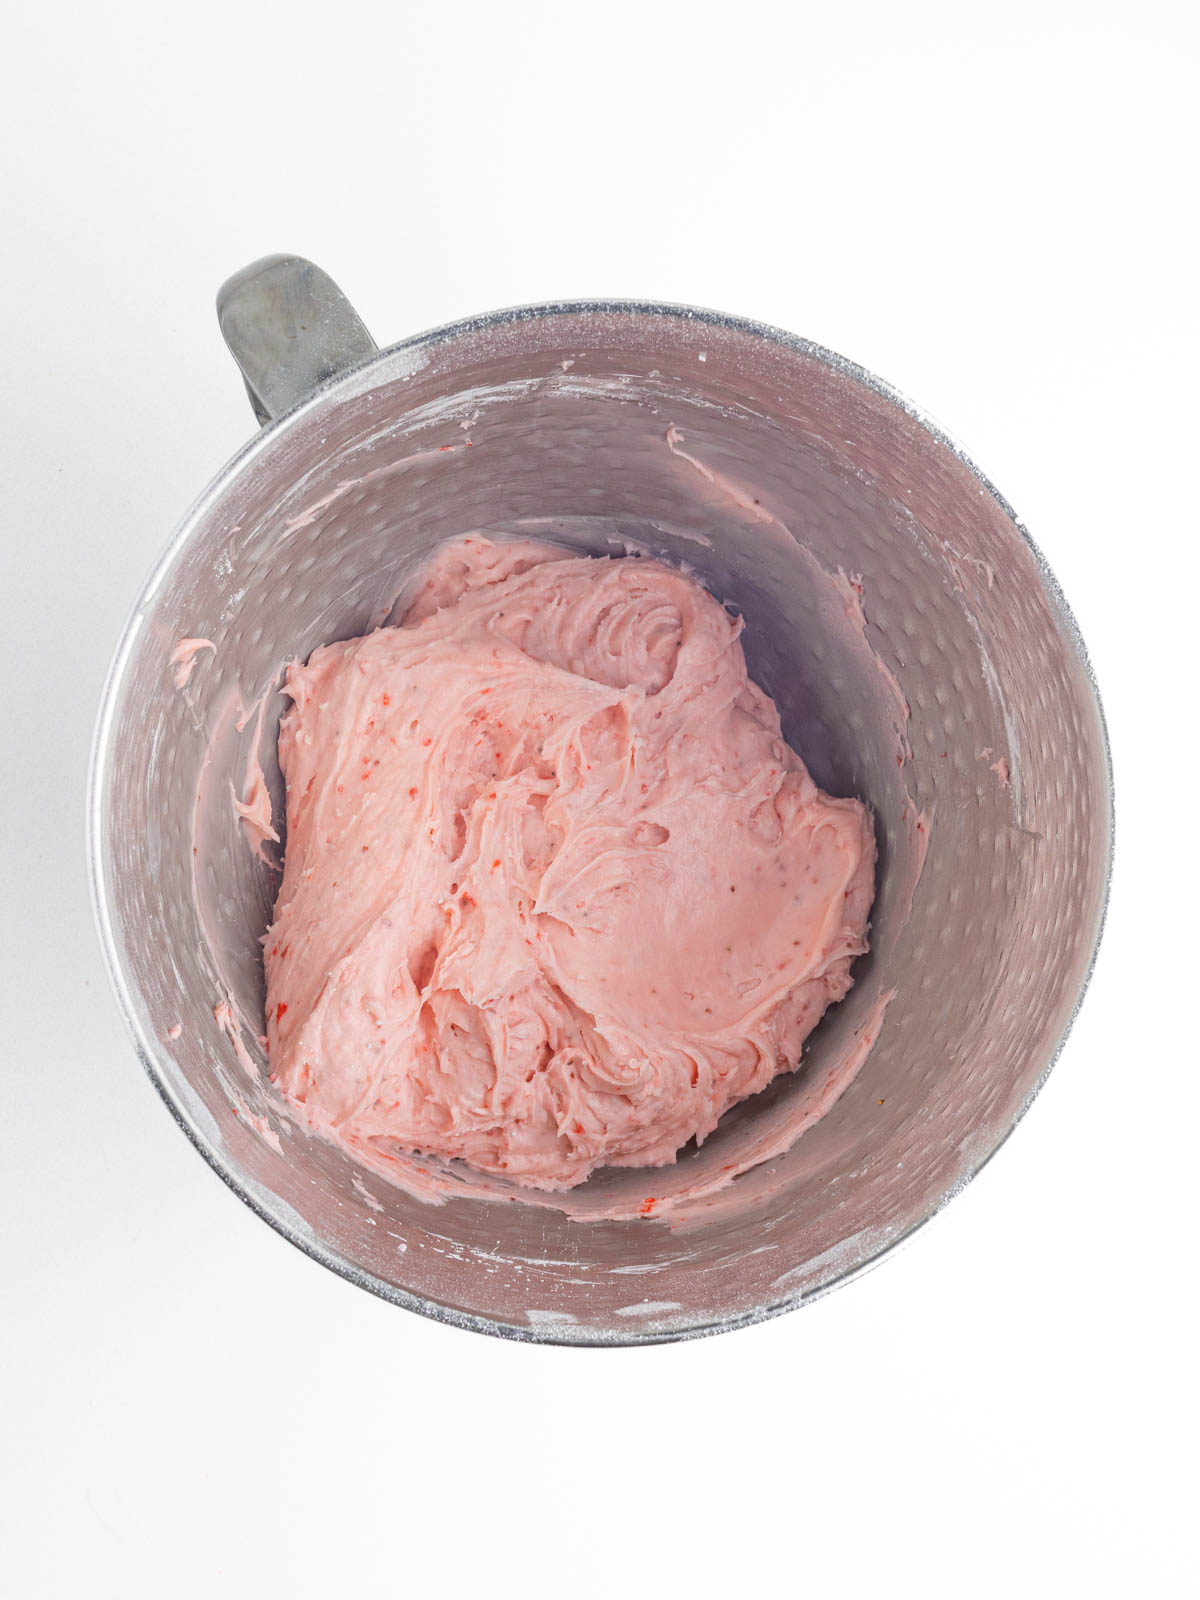 Pink strawberry frosting in a silver textured mixing bowl.